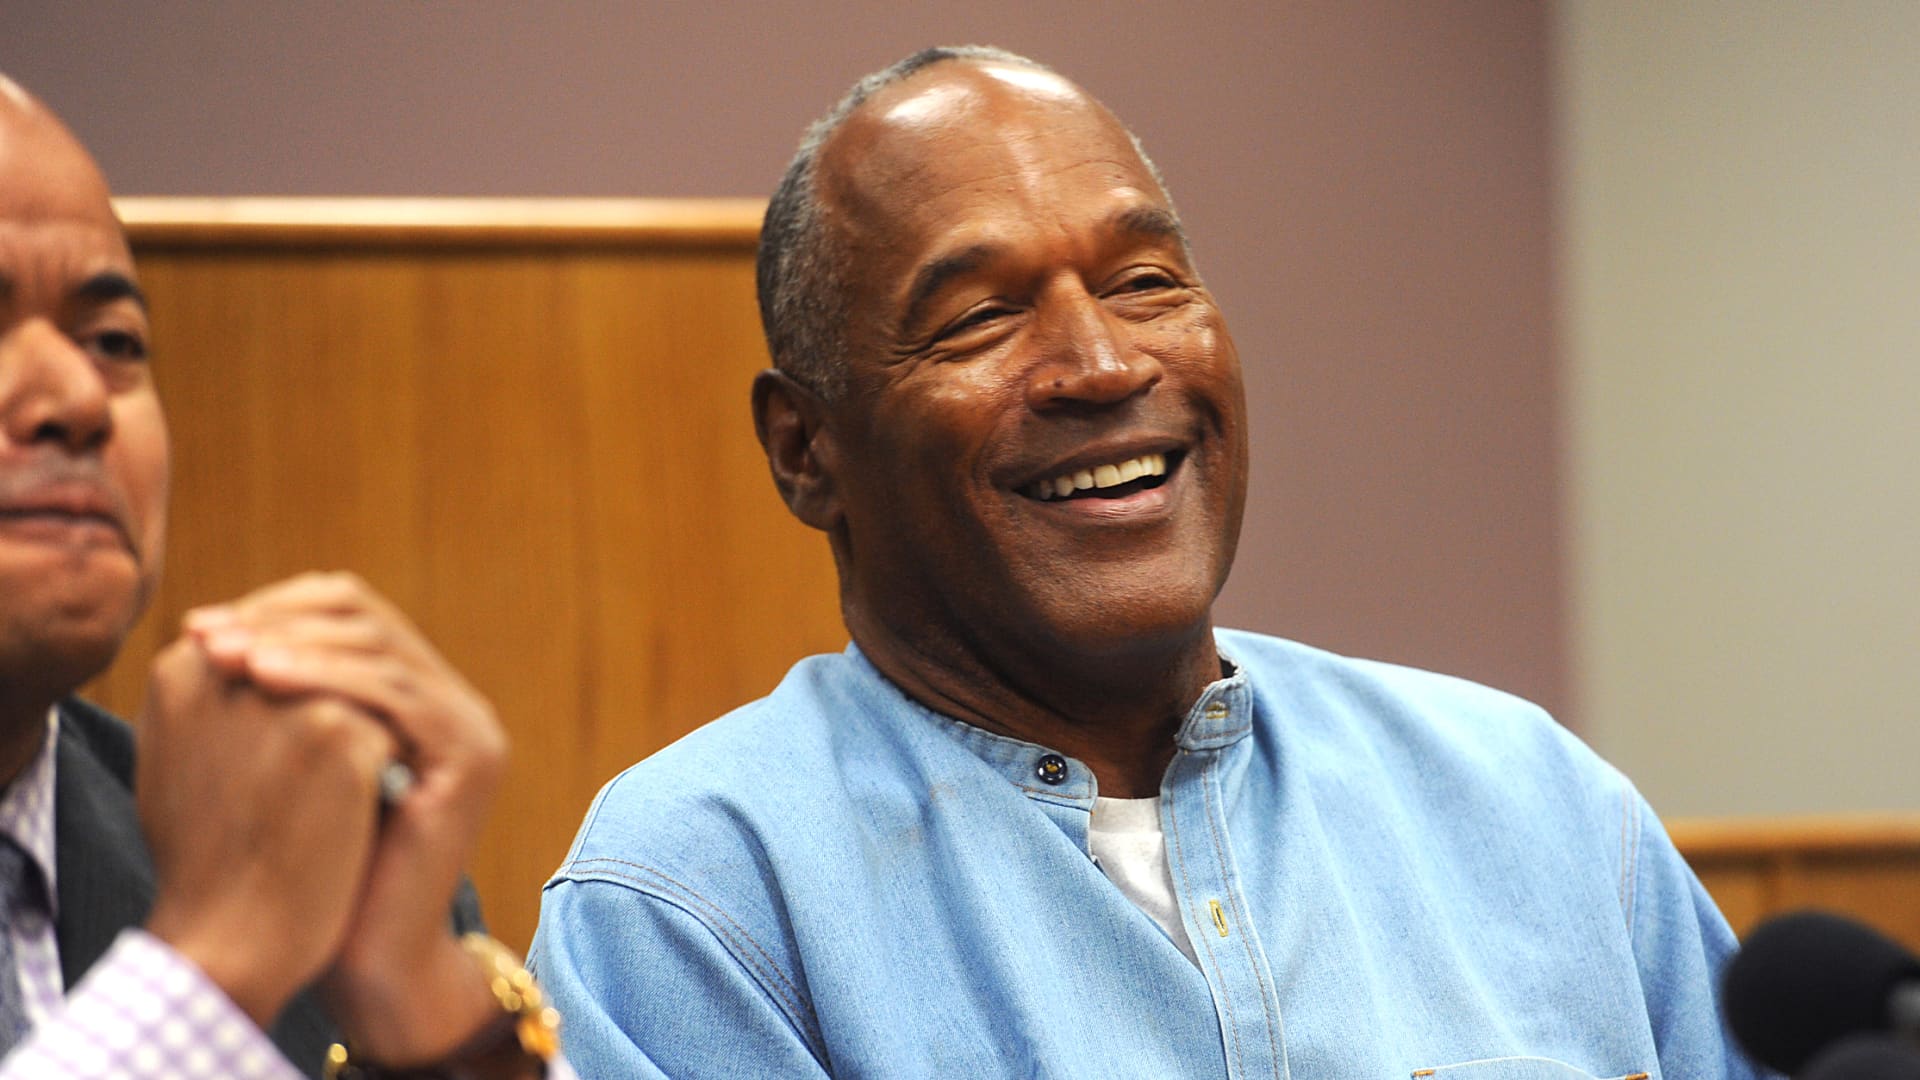 OJ Simpson laughing while wearing a blue polo